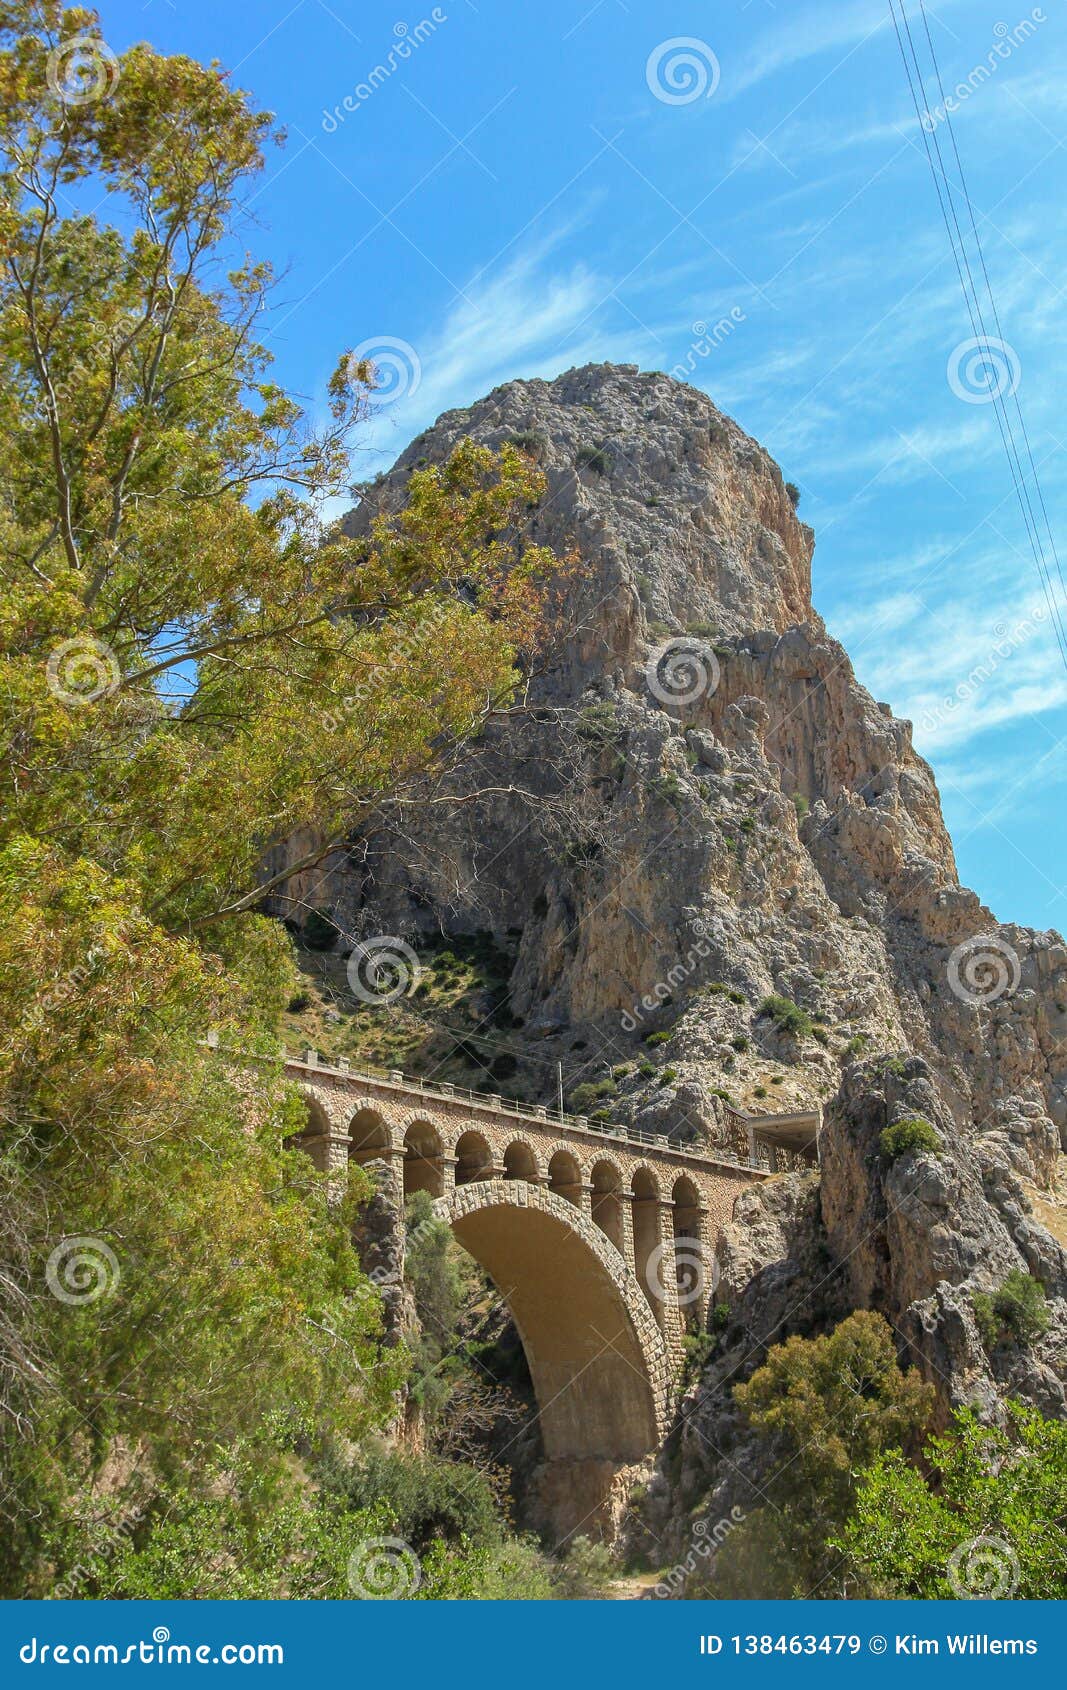 mountain view with a stone bridge in the malaga province